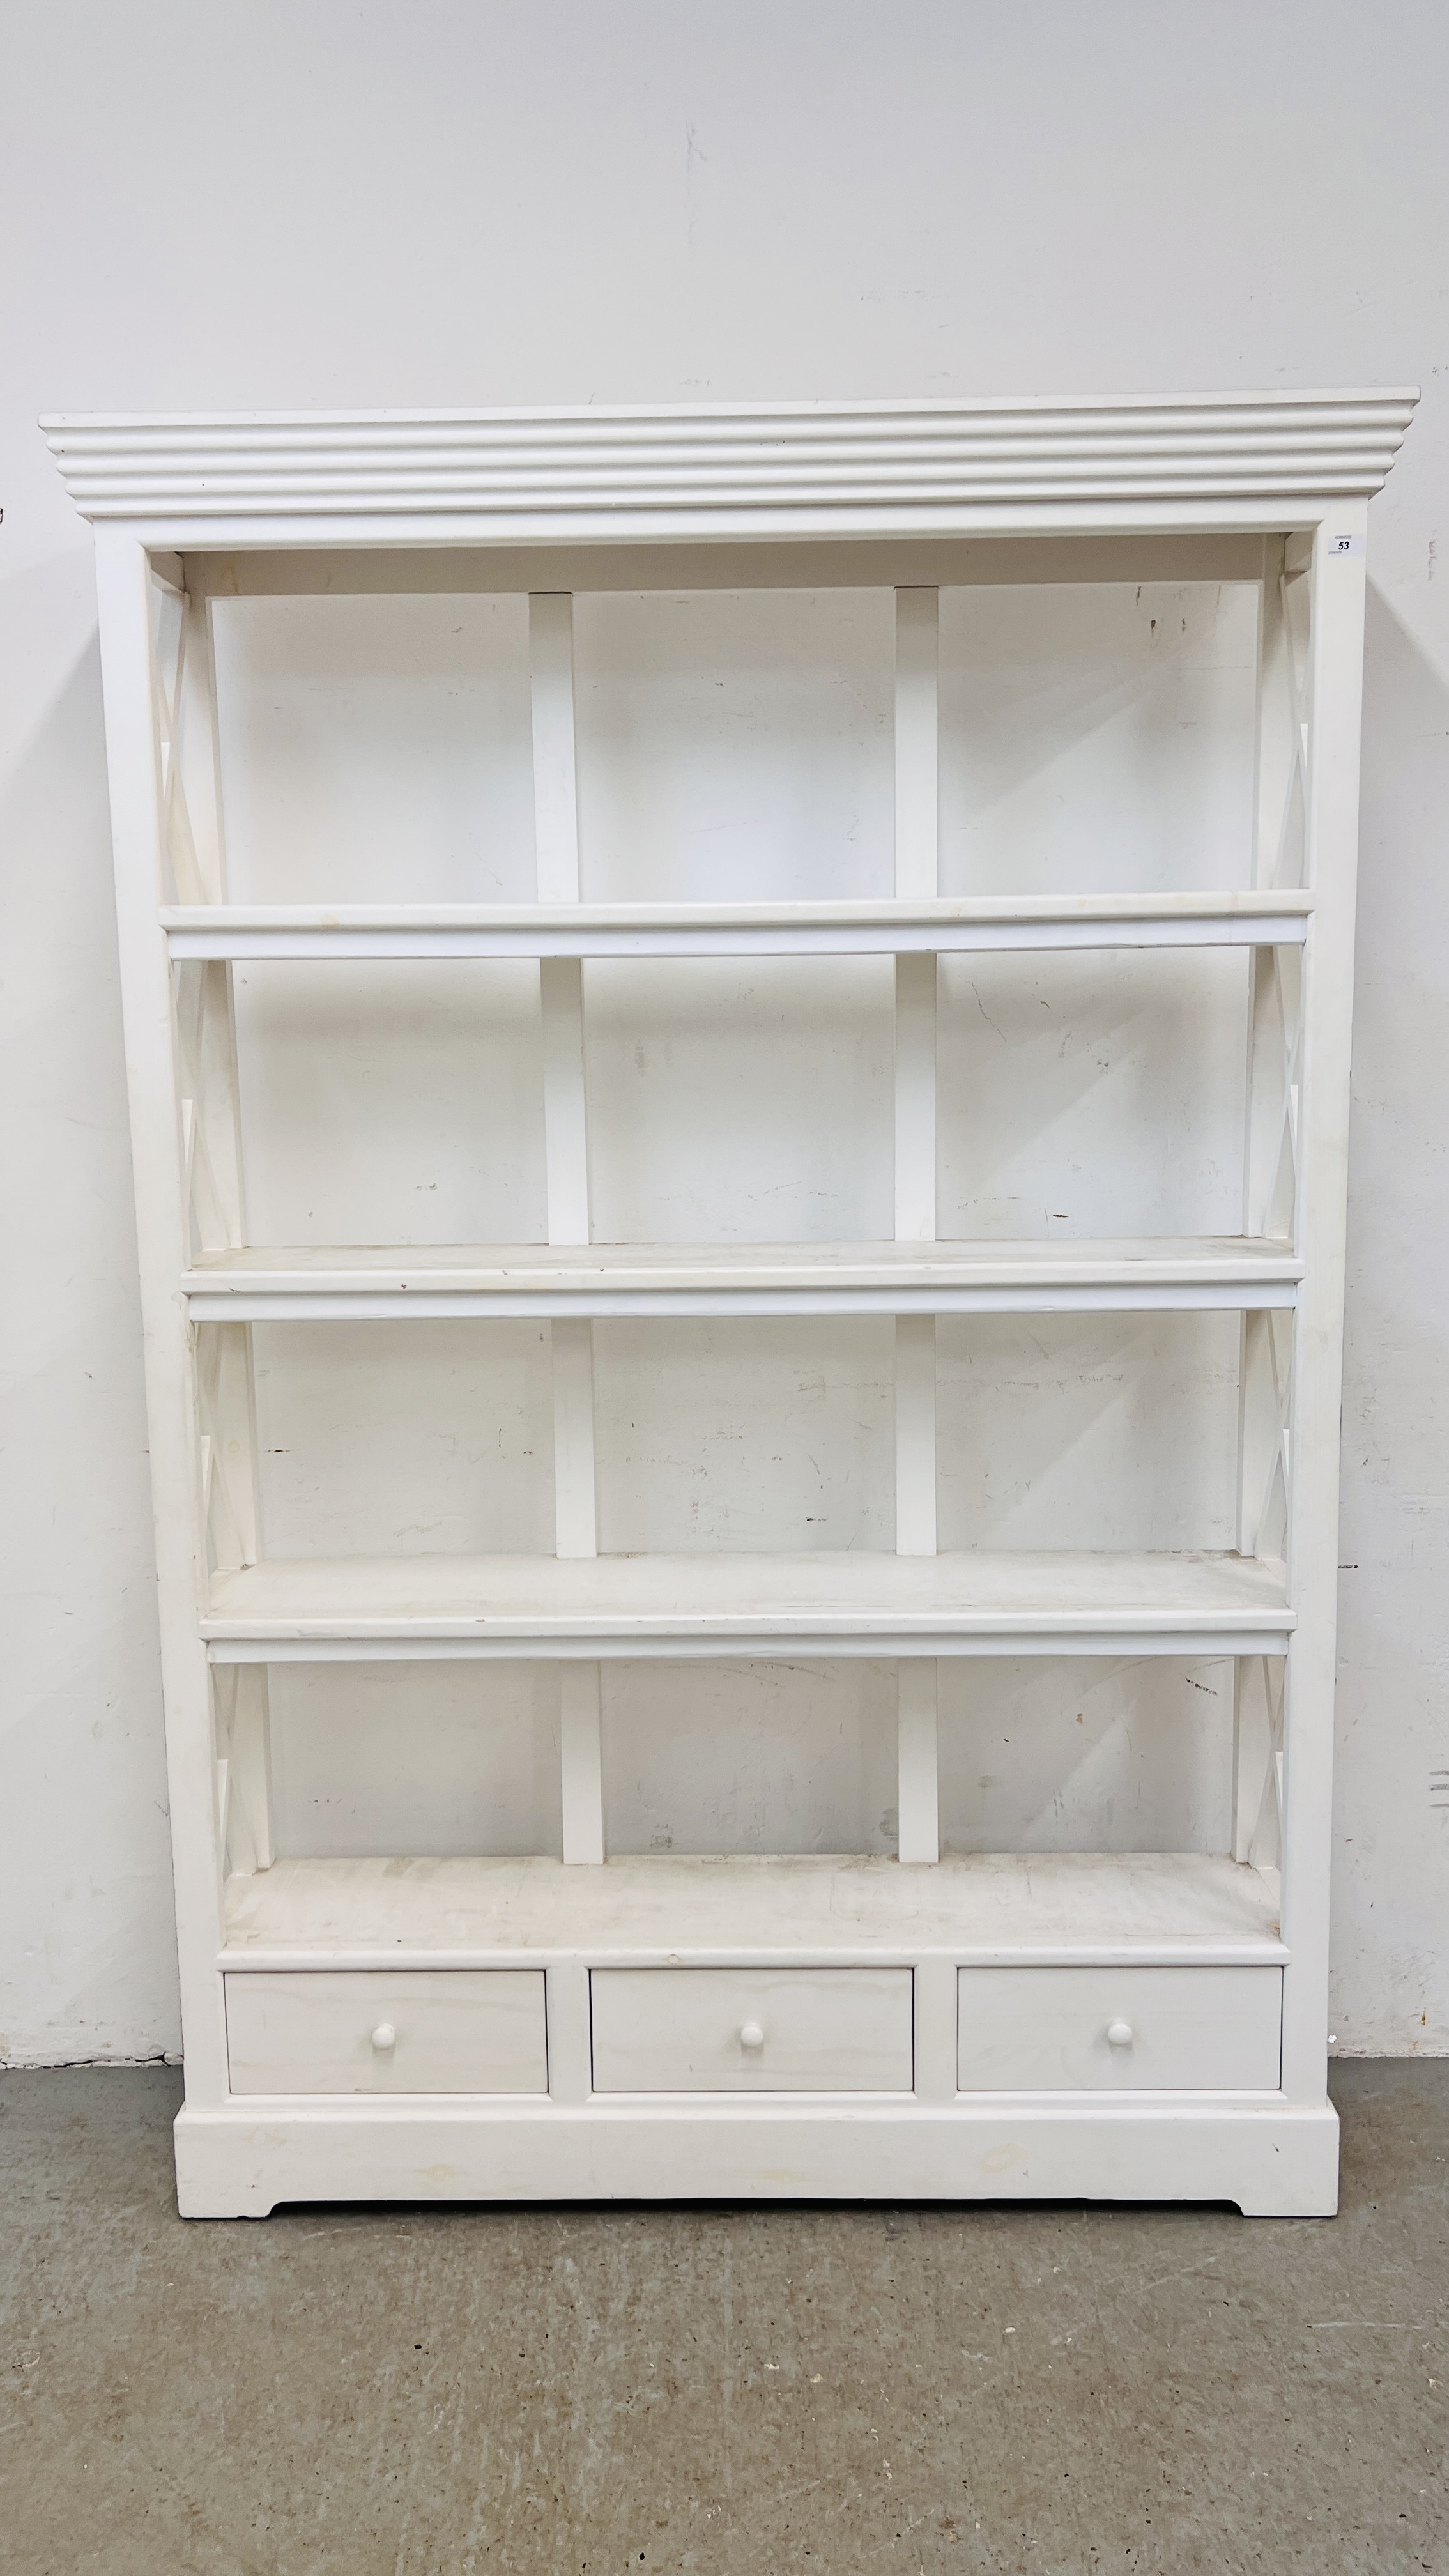 A WHITE PAINTED FOUR TIER BOOKSHELF WITH DRAWERS TO BASE - HEIGHT 200CM. WIDTH 132CM. DEPTH 30CM.